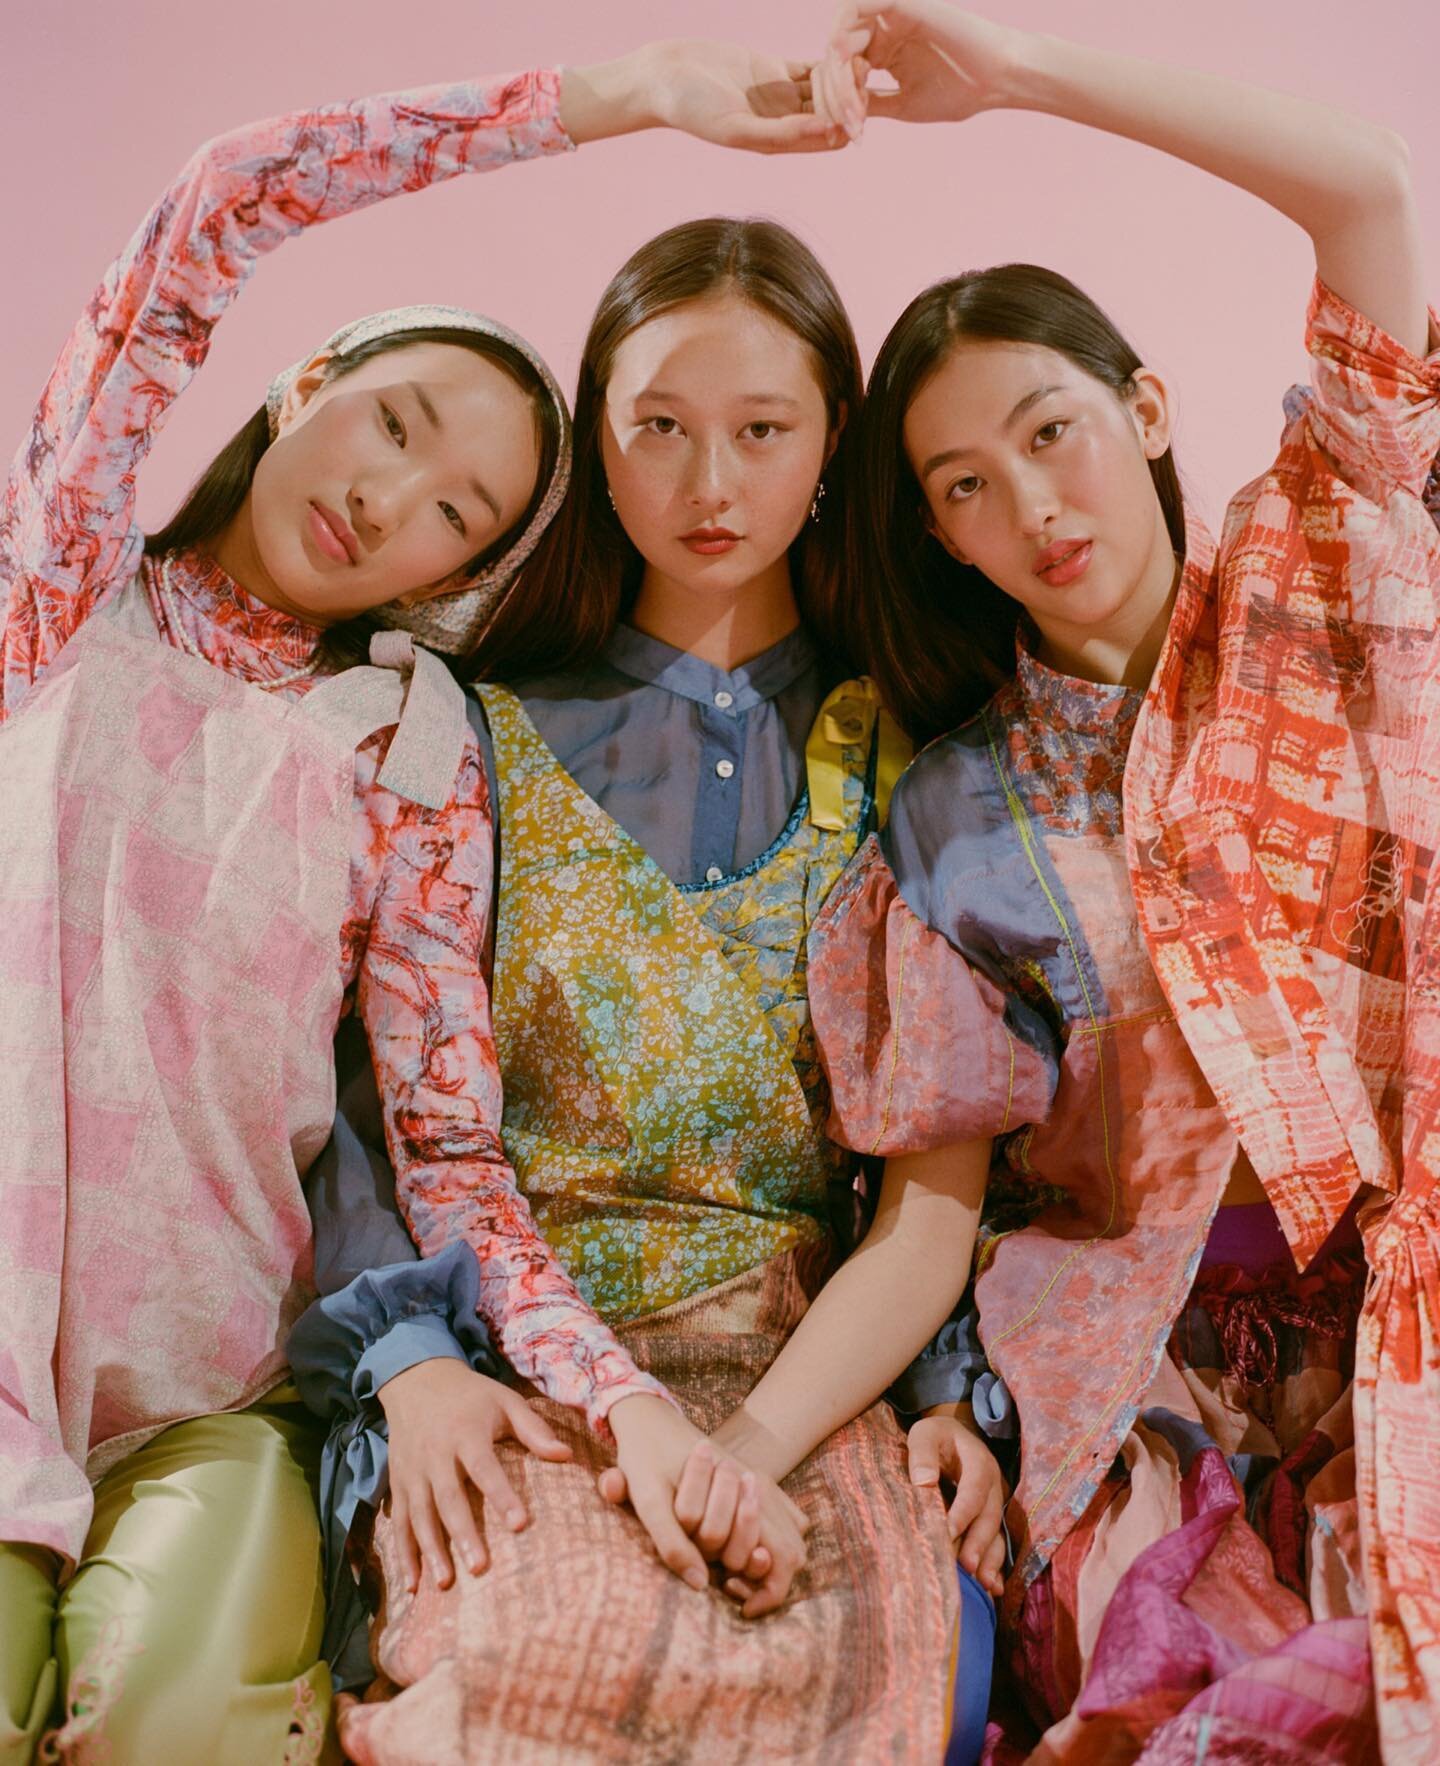 SS21 / Where Are You From? 
⁣
Photography @_natashakilleen
HMU @elizabethclewis 
Models @emilycremer__ @jadehsuu @connieou_ from @priscillasmodels 
Photoshoot Assist @angiexylas @hannahriley4 
Space @thedalestudio 
Sponsored by @libertylondon